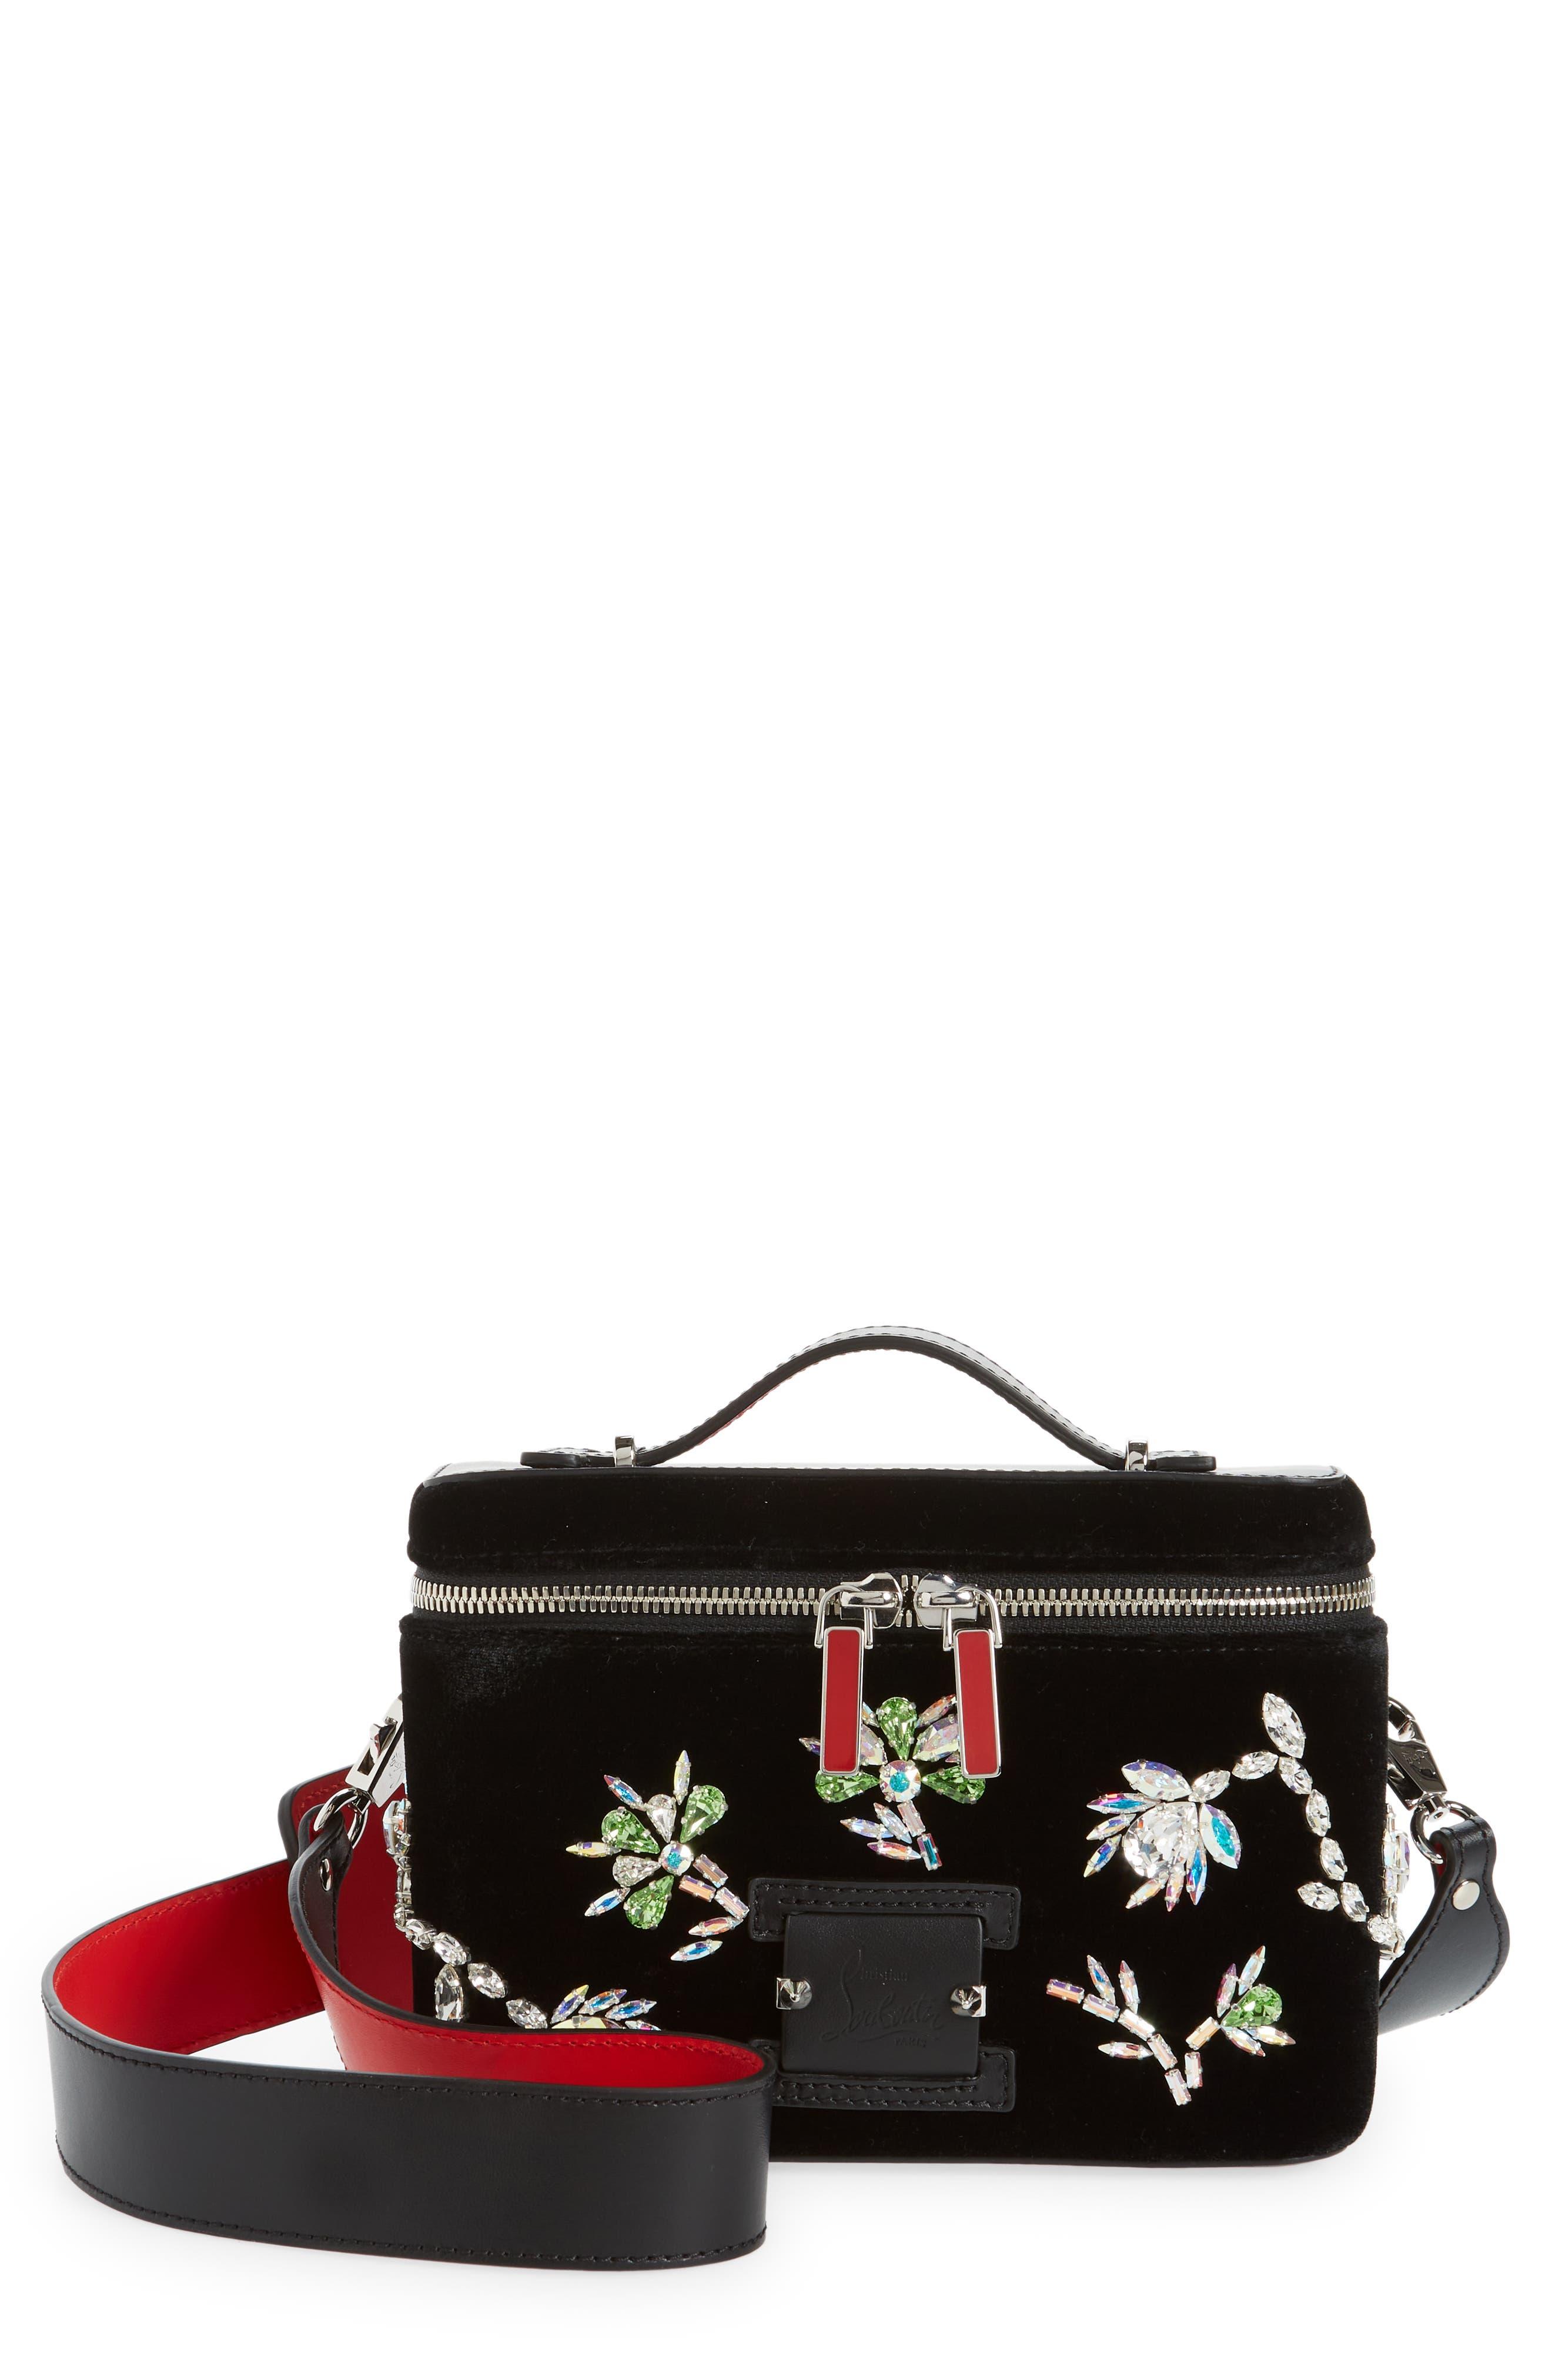 Christian Louboutin Kypipouch Crystal Embellished Crossbody Bag in ...